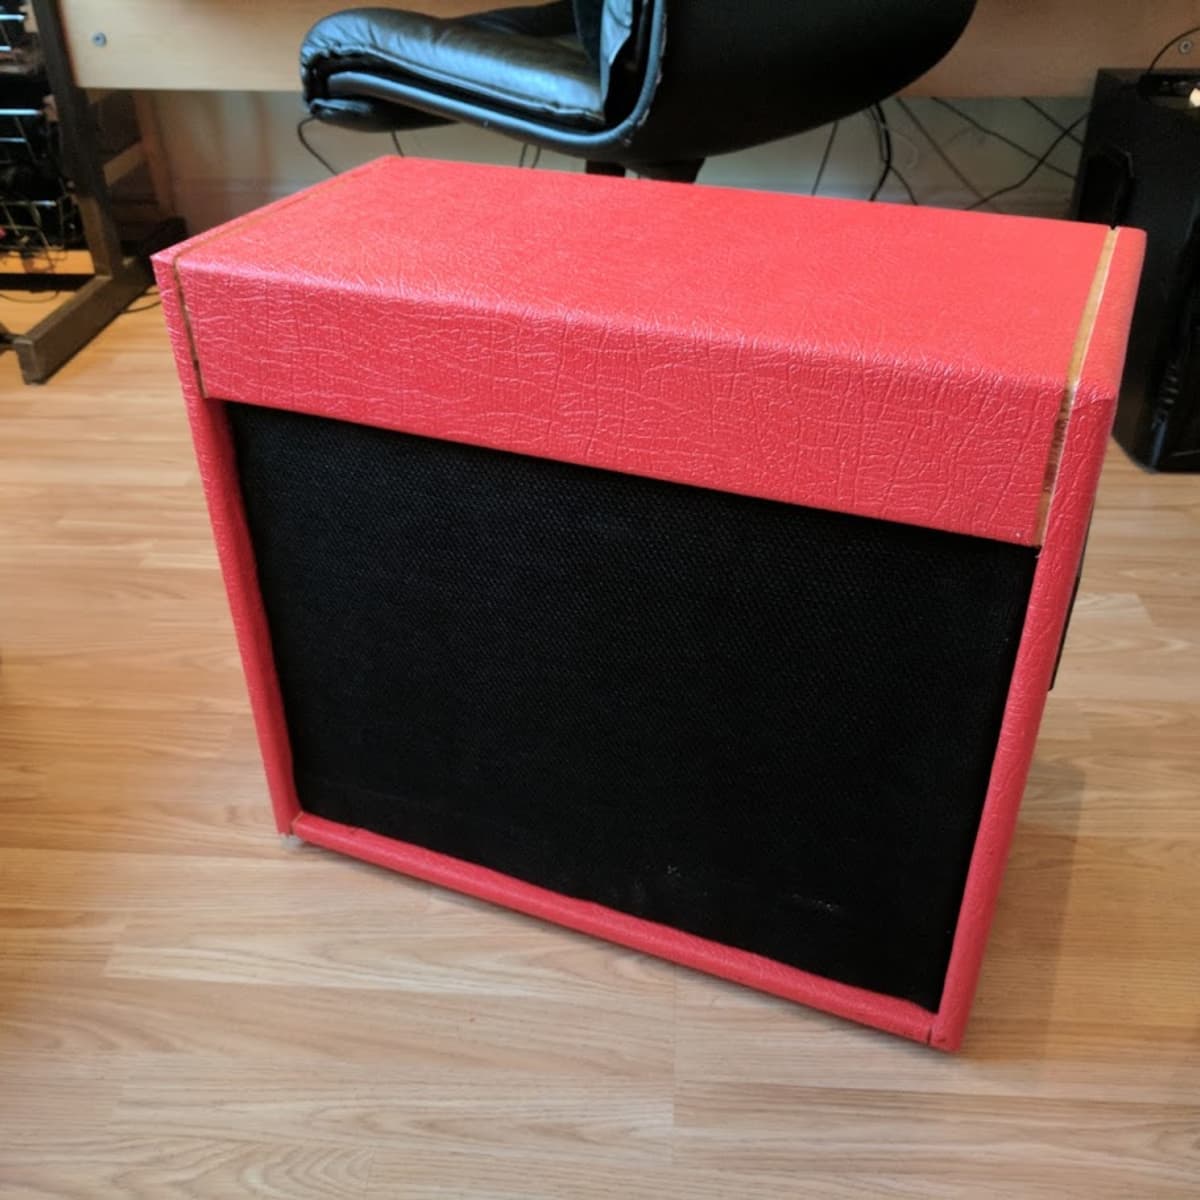 How To Build A Diy Guitar Cab Spinditty